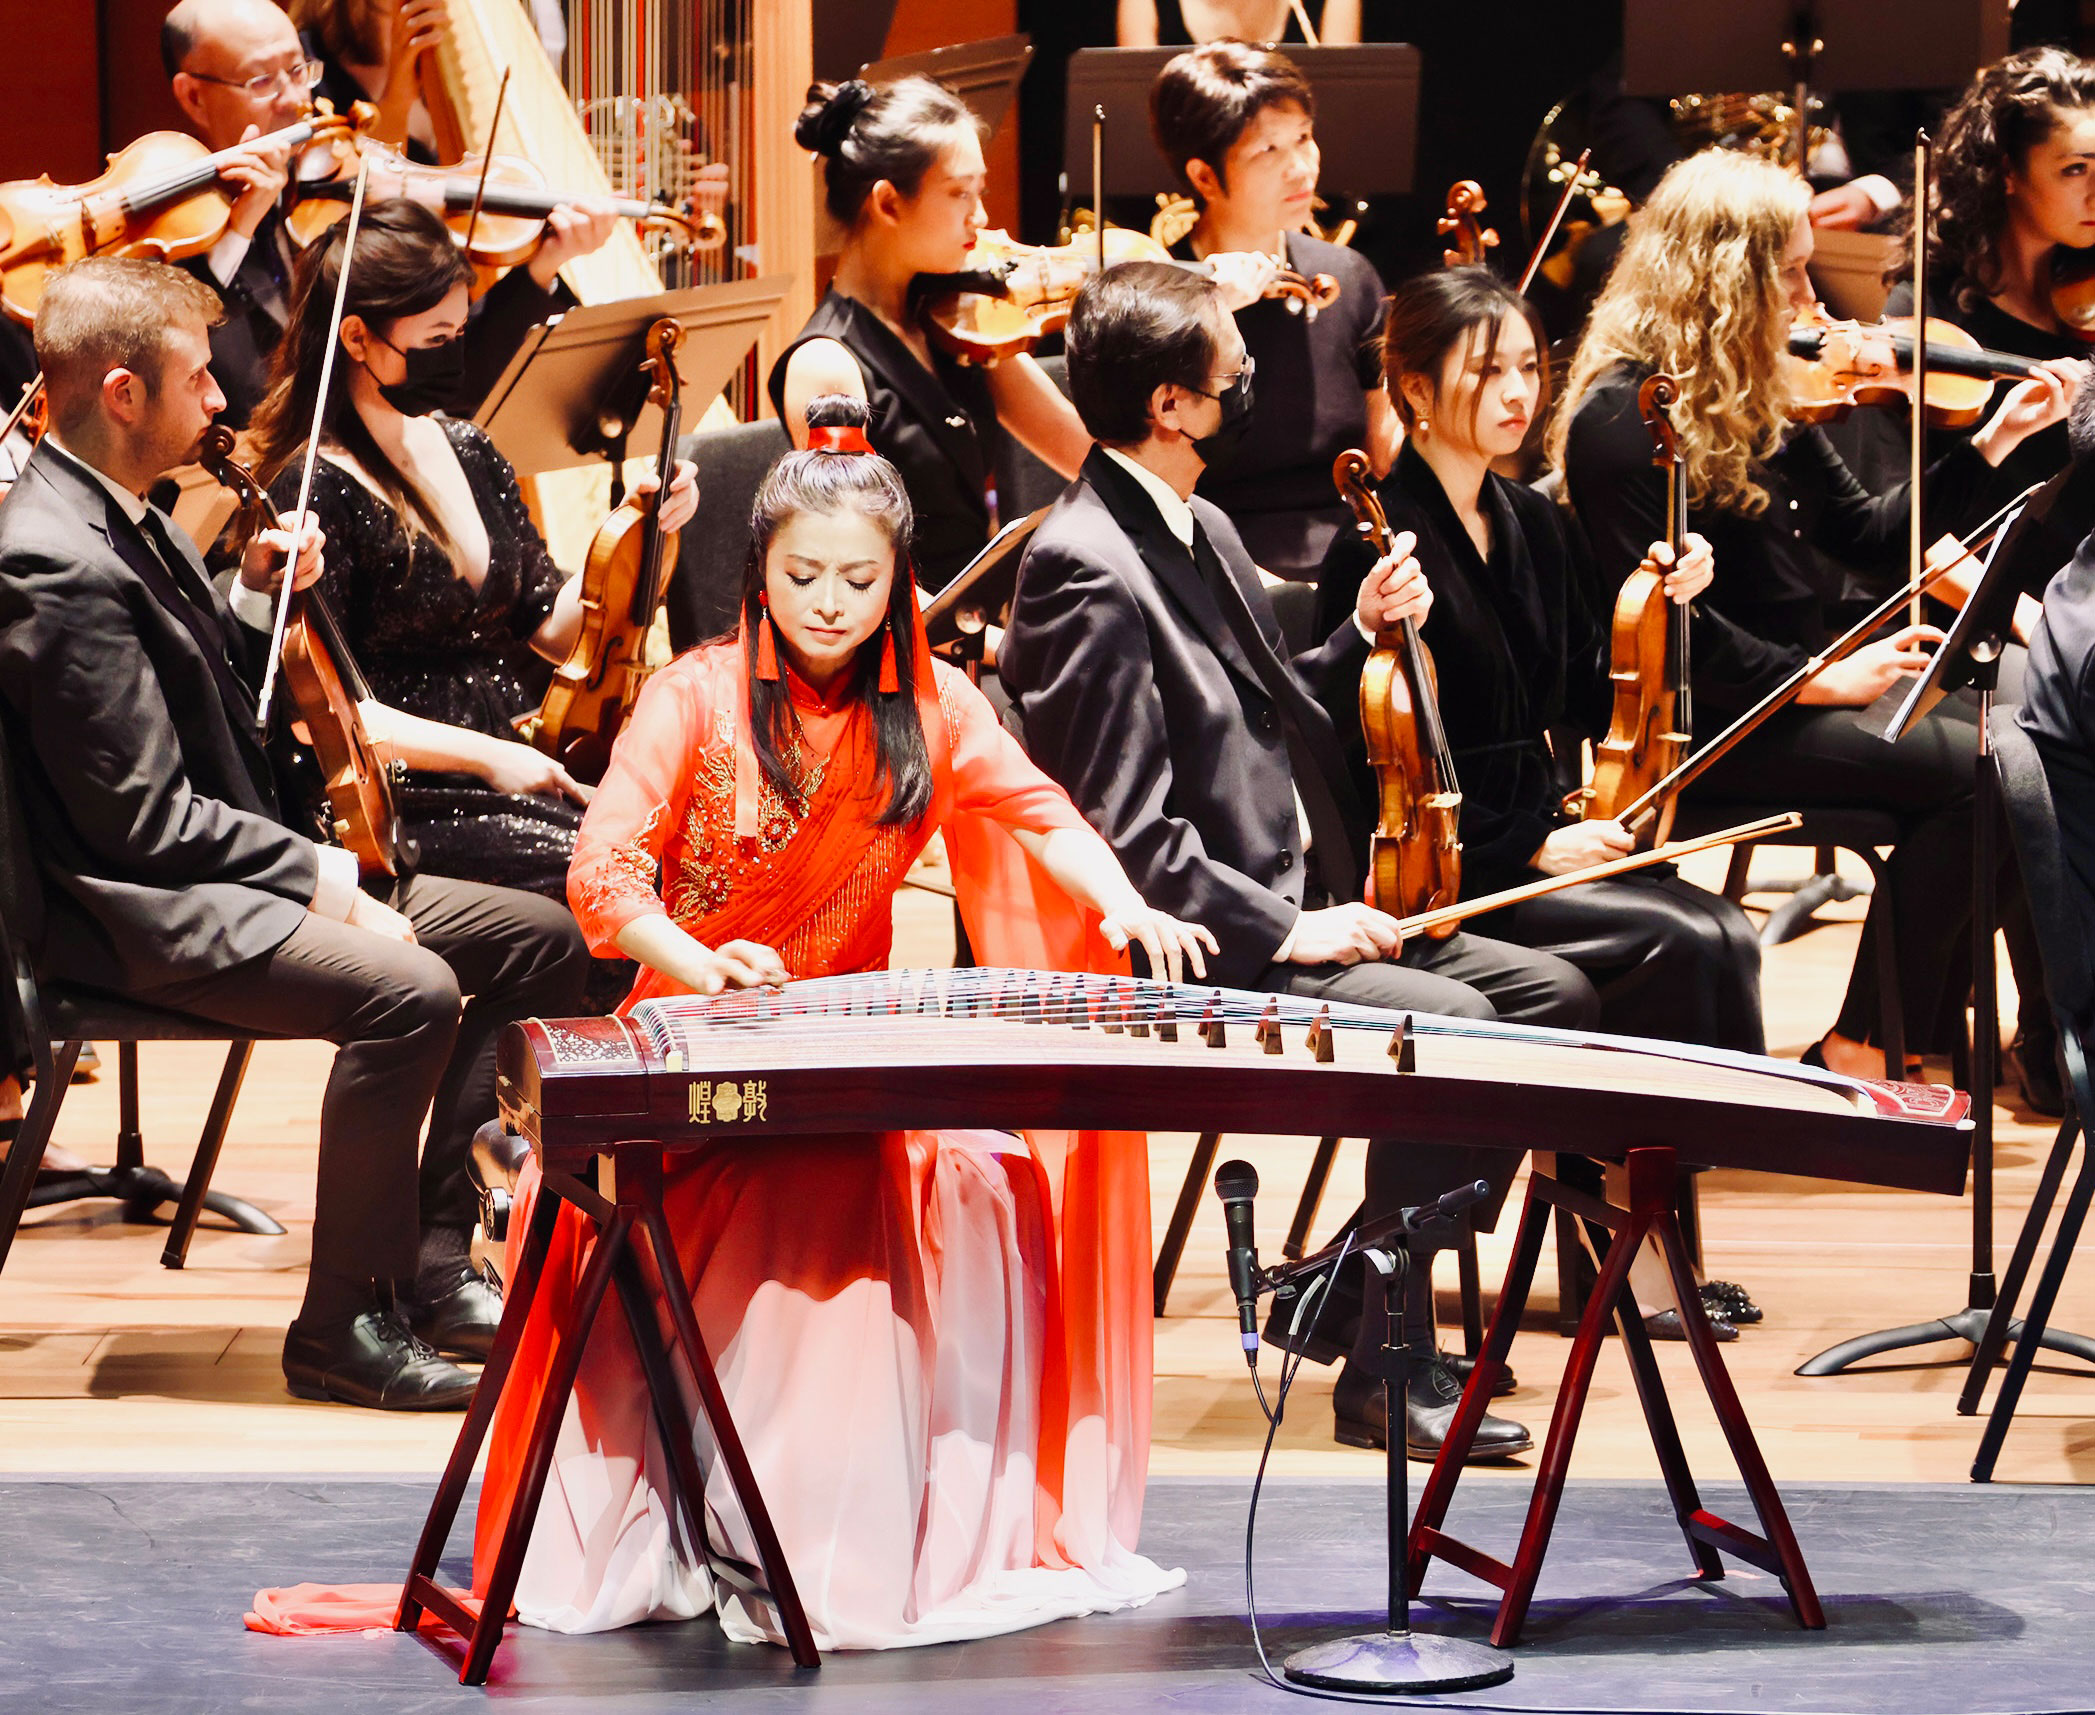 Daisy Wu performs on the guzheng during the concert at New York City’s Lincoln Center